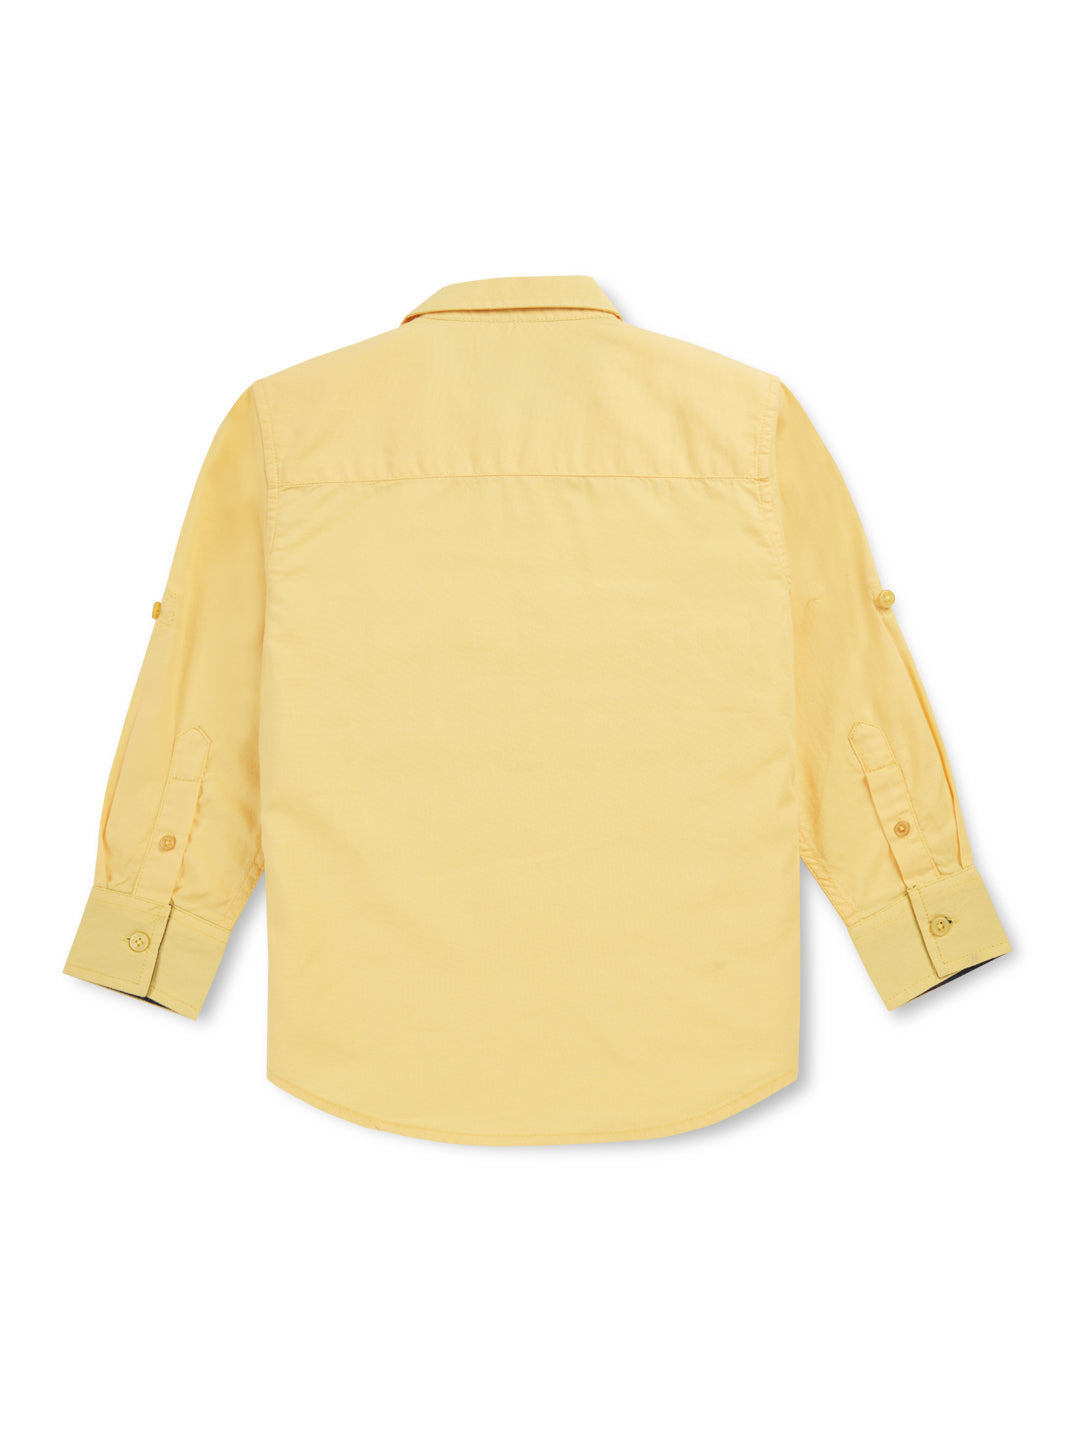 Boys Yellow Solid Cotton Shirt Full Sleeves